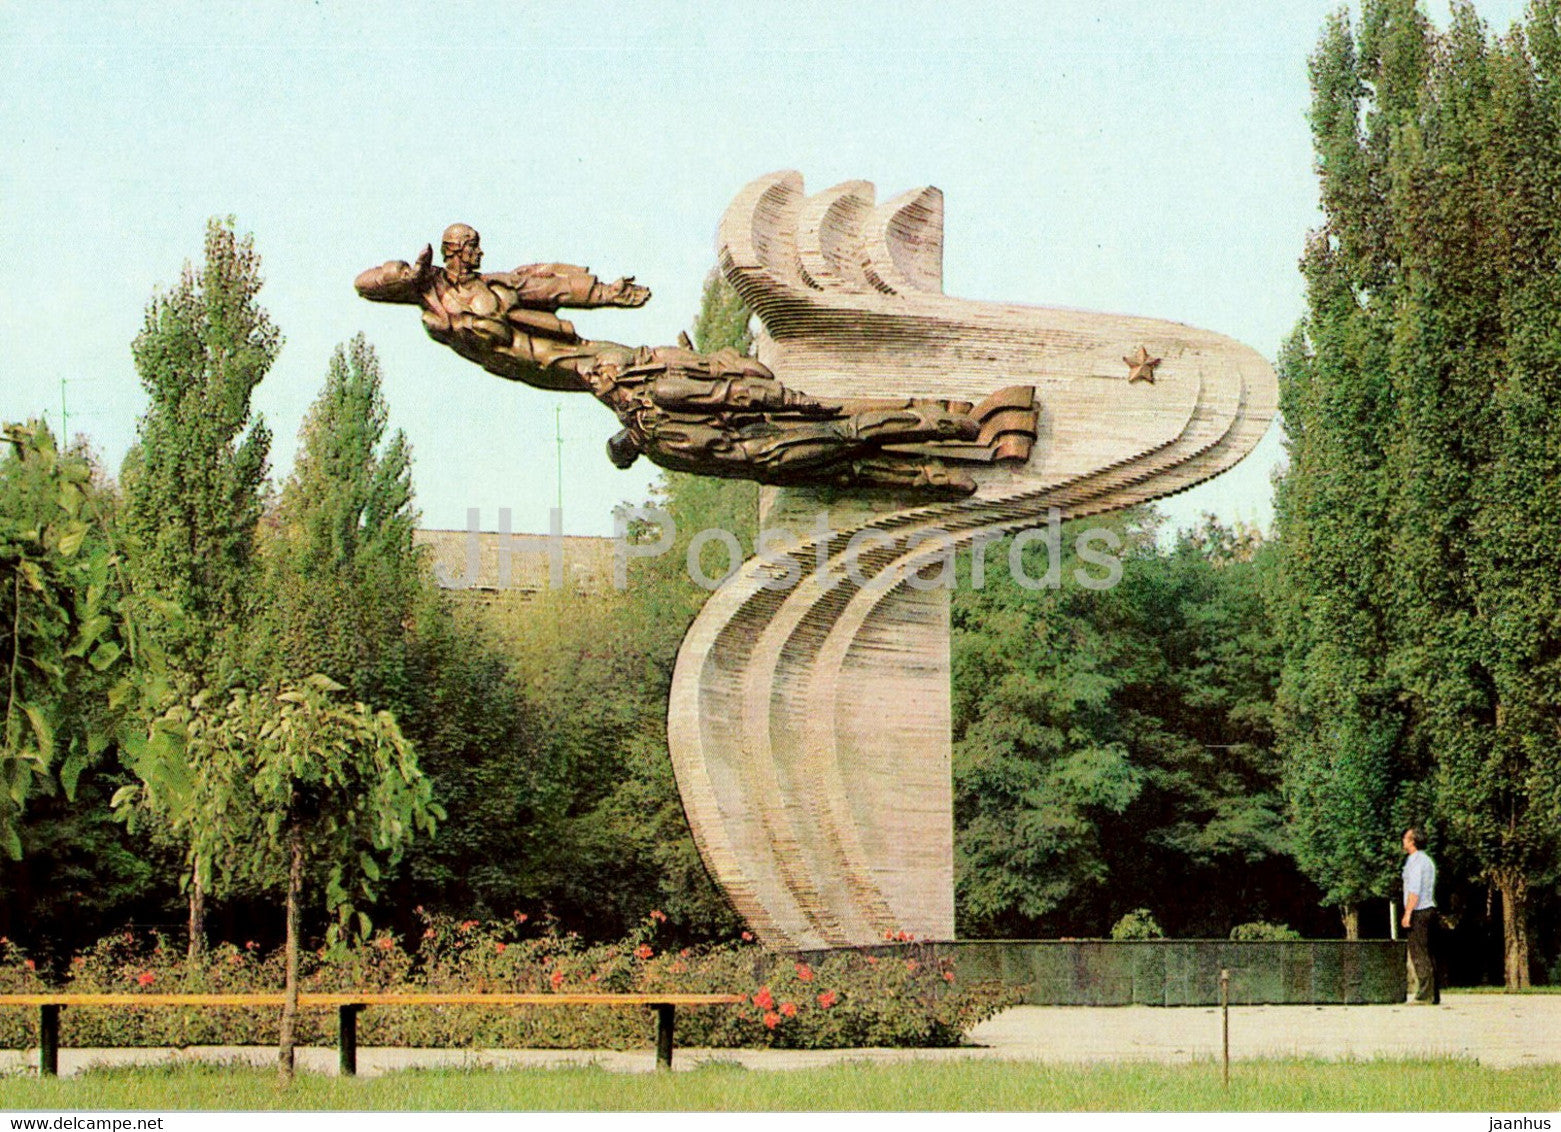 Odessa - Monument to the Aviators of the 69th Fighter Regiment - postal stationery - 1983 - Ukraine USSR - unused - JH Postcards